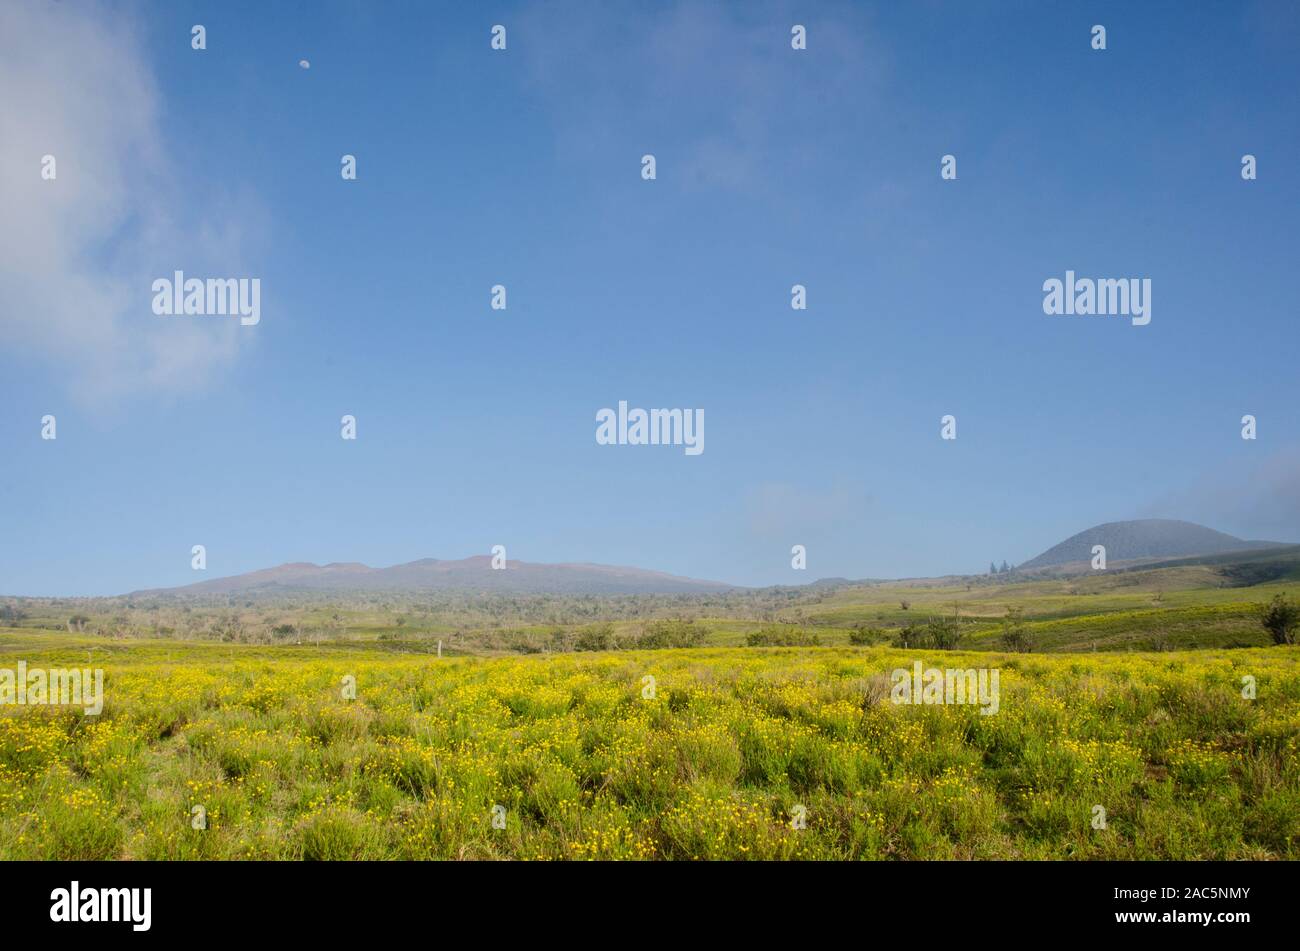 Grape seed plants with bright yellow flowers grow along Saddle Road, with Mauna Kea in the distance, Big Island. Stock Photo